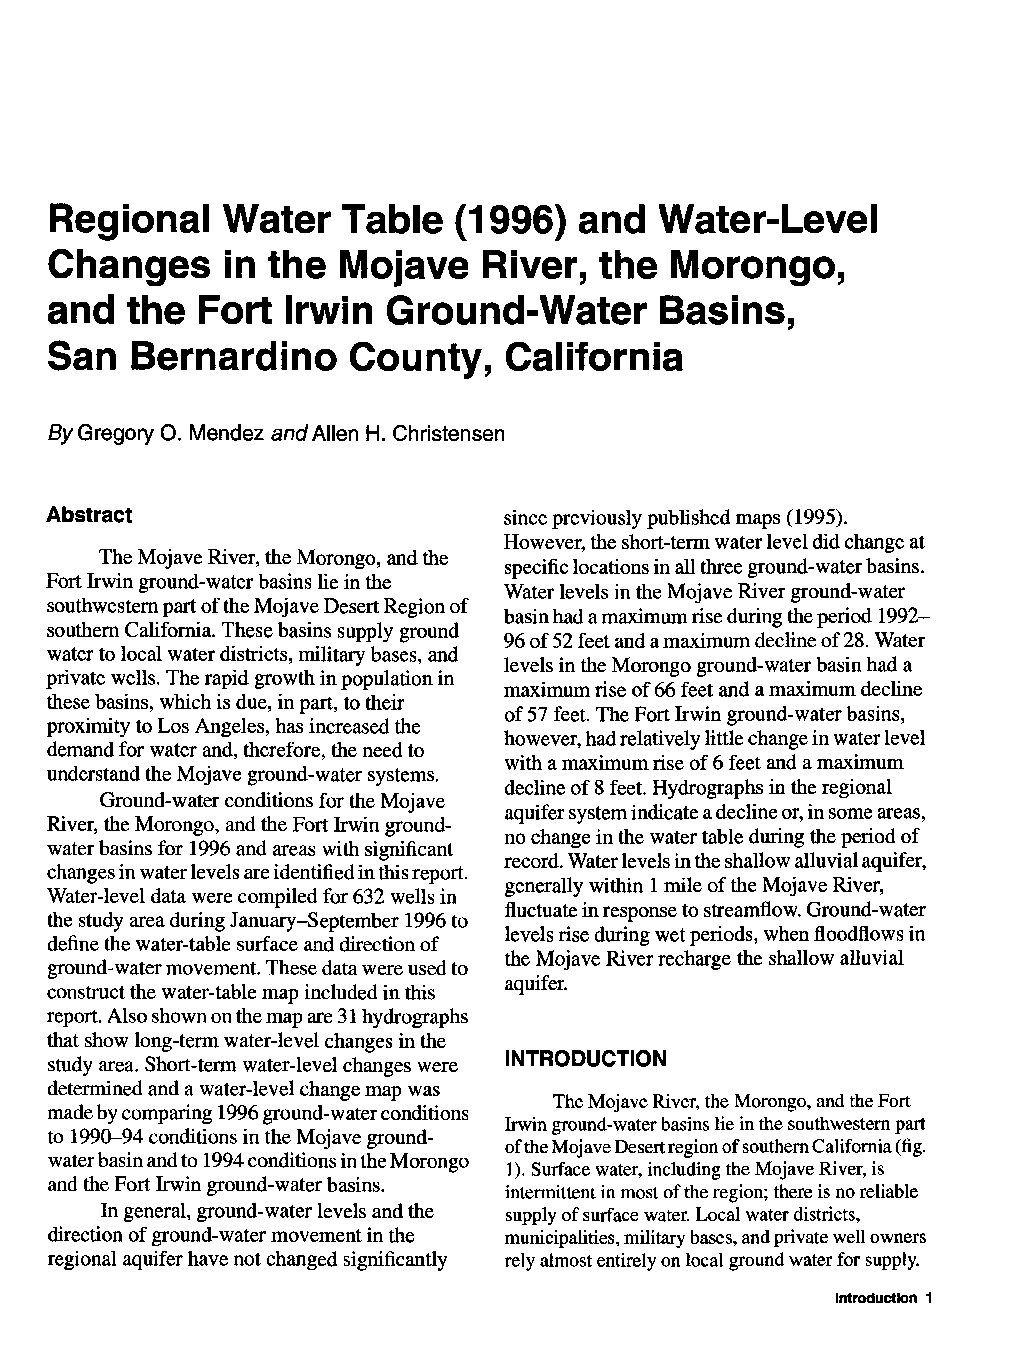 Regional water table (1996) and water-level changes in the Mojave River, Morongo, and Fort Irwin ground-water basins, San Bernardino County